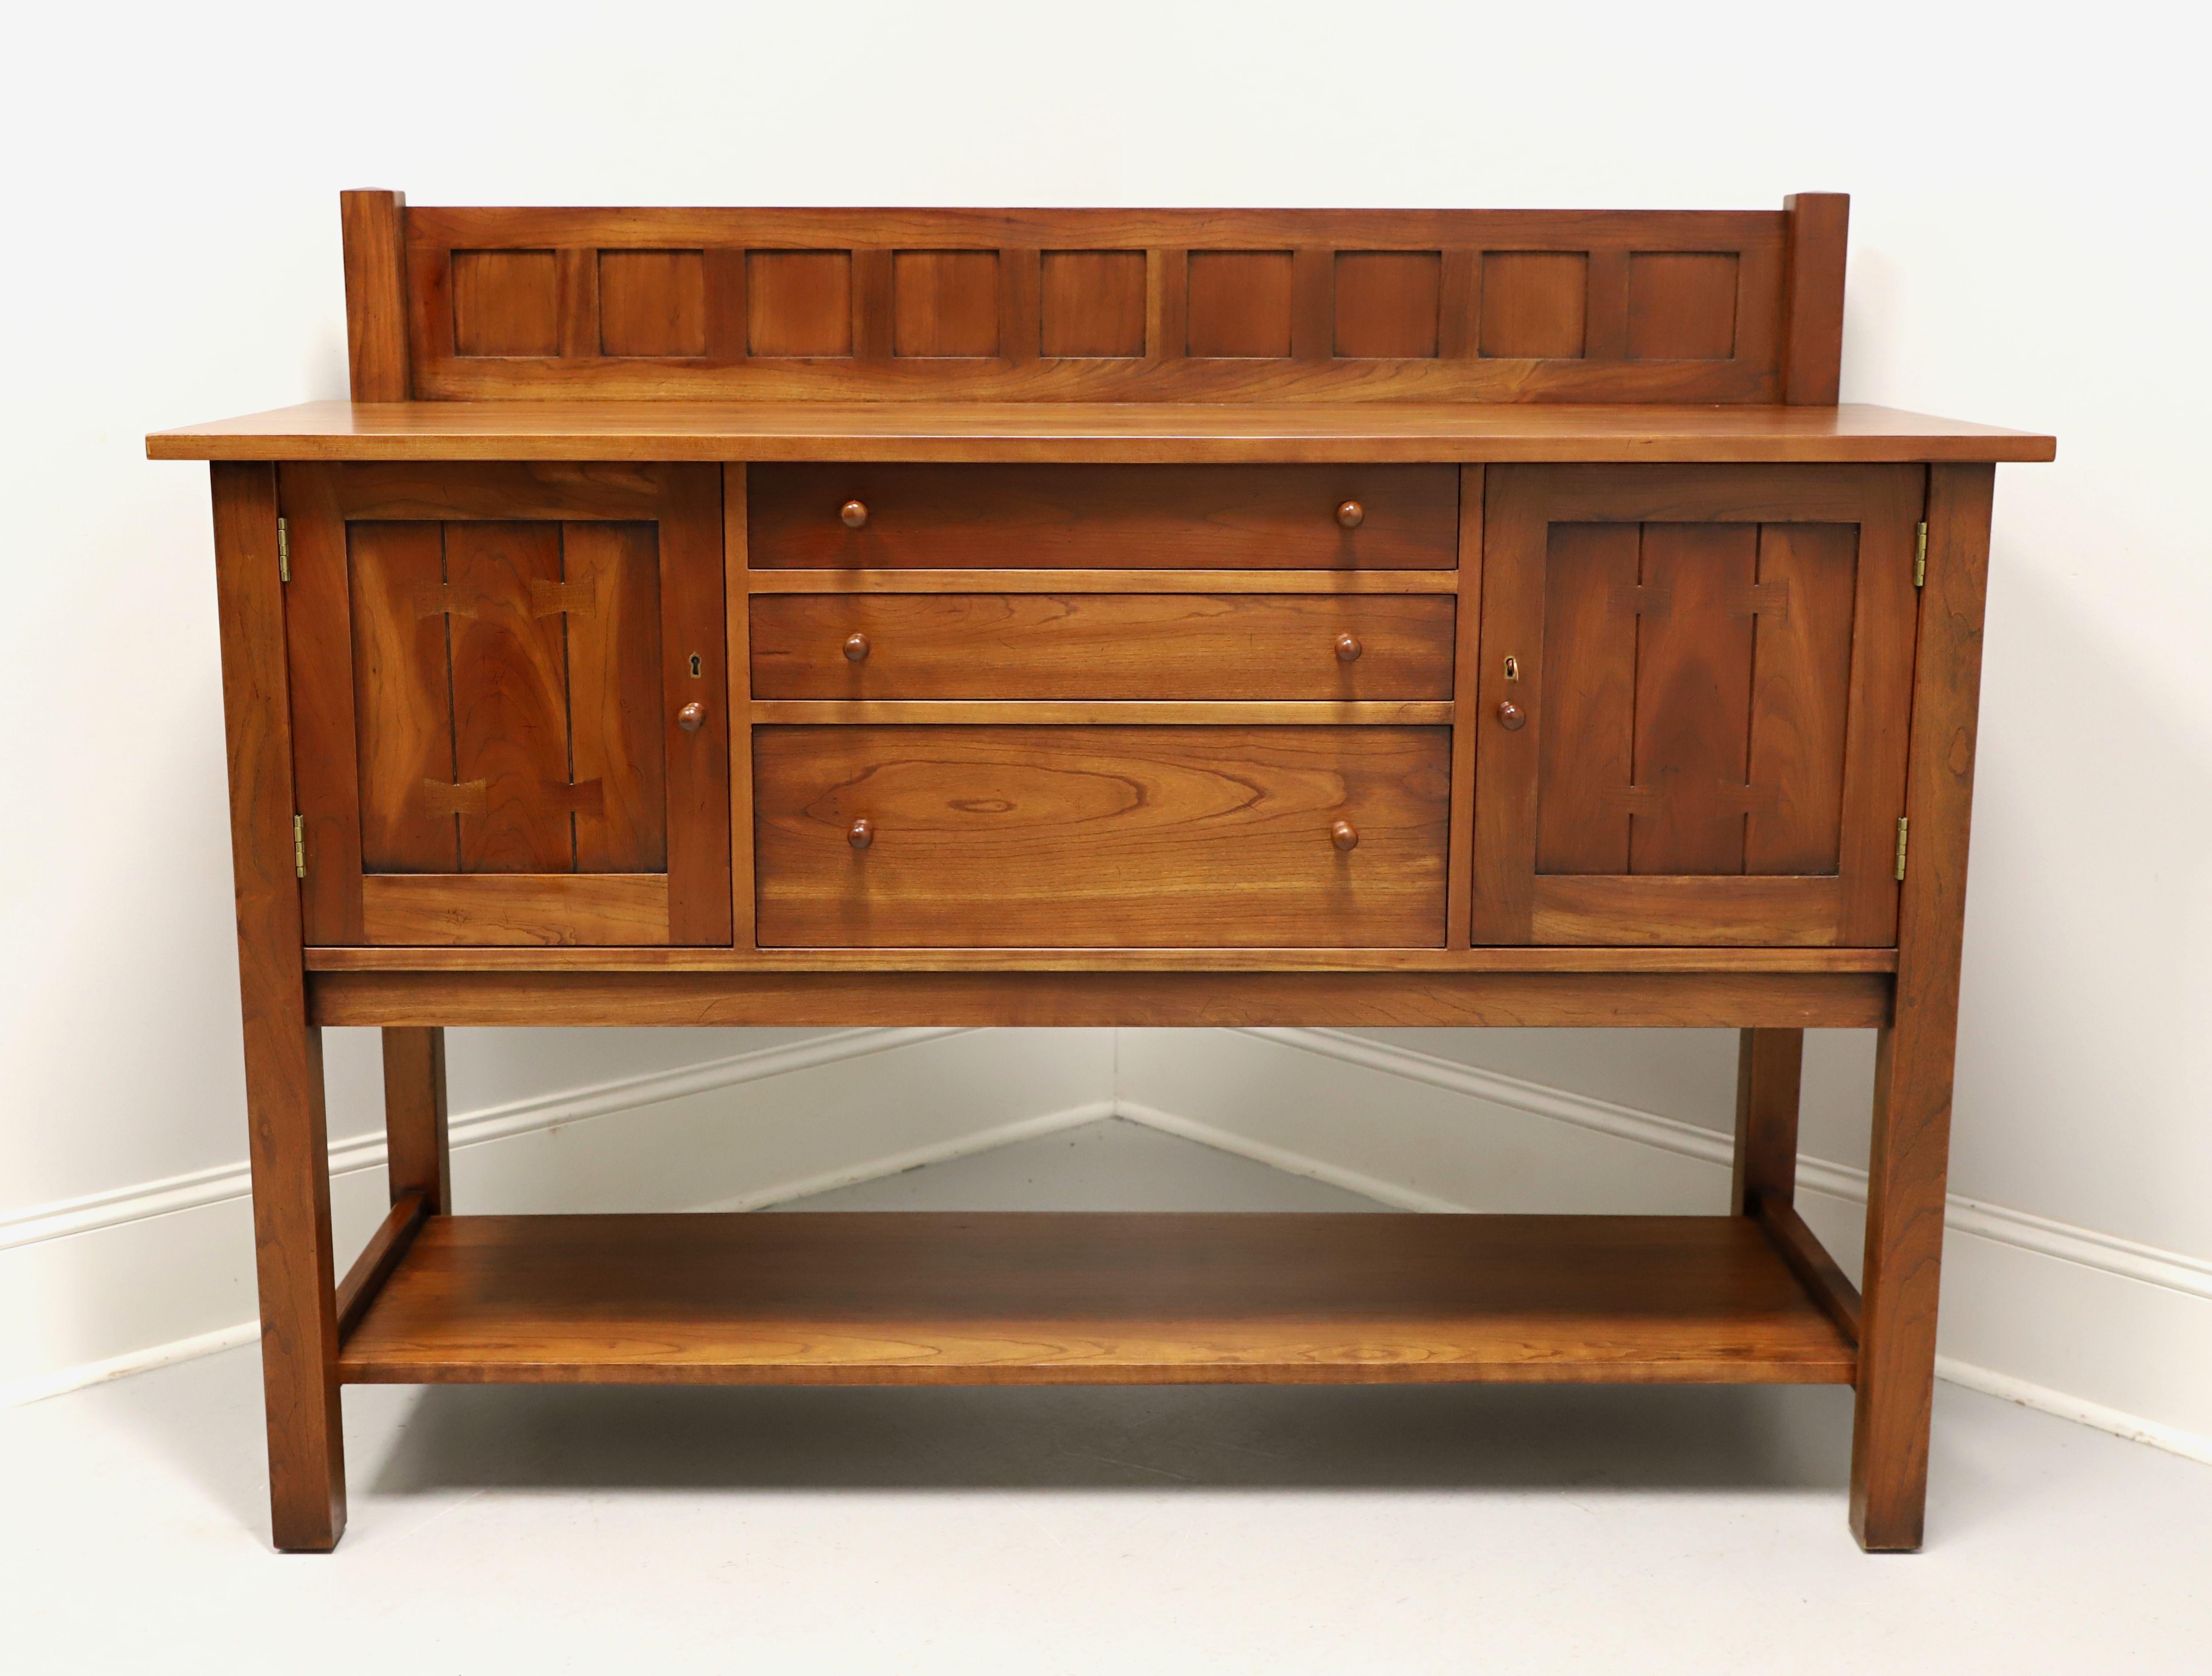 A Mission style sideboard by Stickley Furniture, from their Mission Collection. Solid cherry wood, brass hinge & lock hardware, square edge top with a plate groove in front of the decorative back gallery, cherry knobs to drawers & doors, butterfly